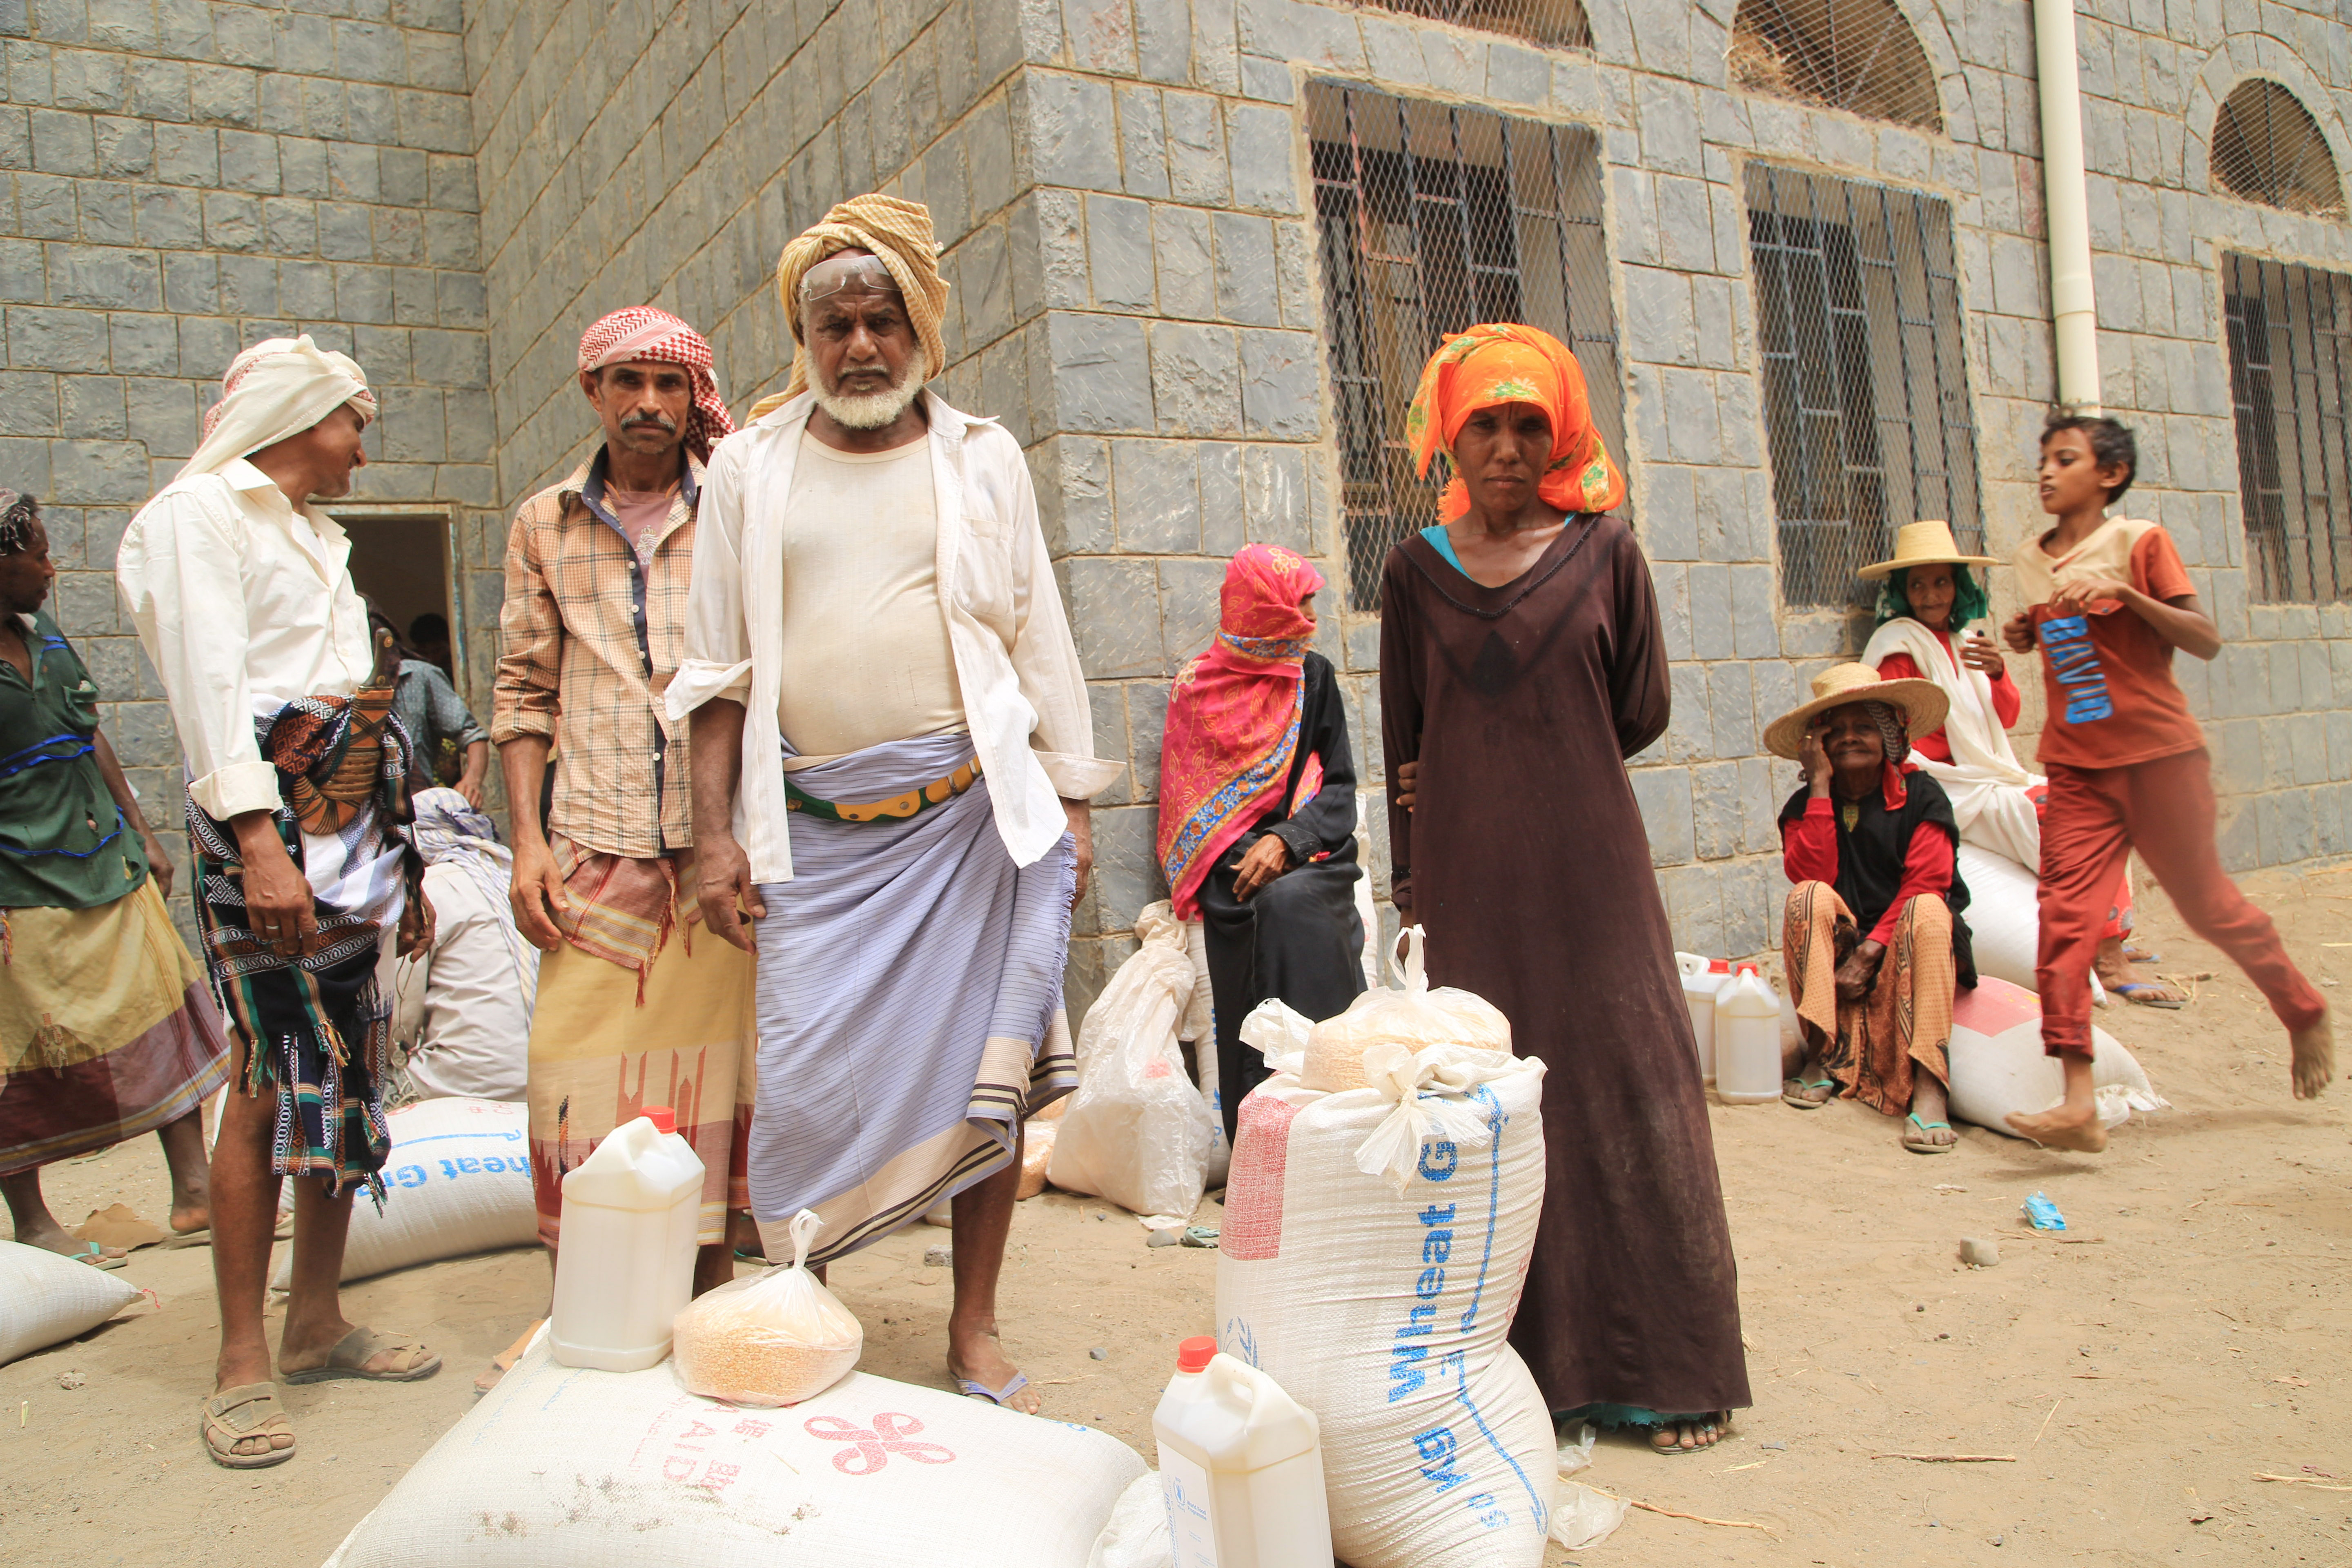 WFP distributes food bags to people in Yemen suffering from civil war